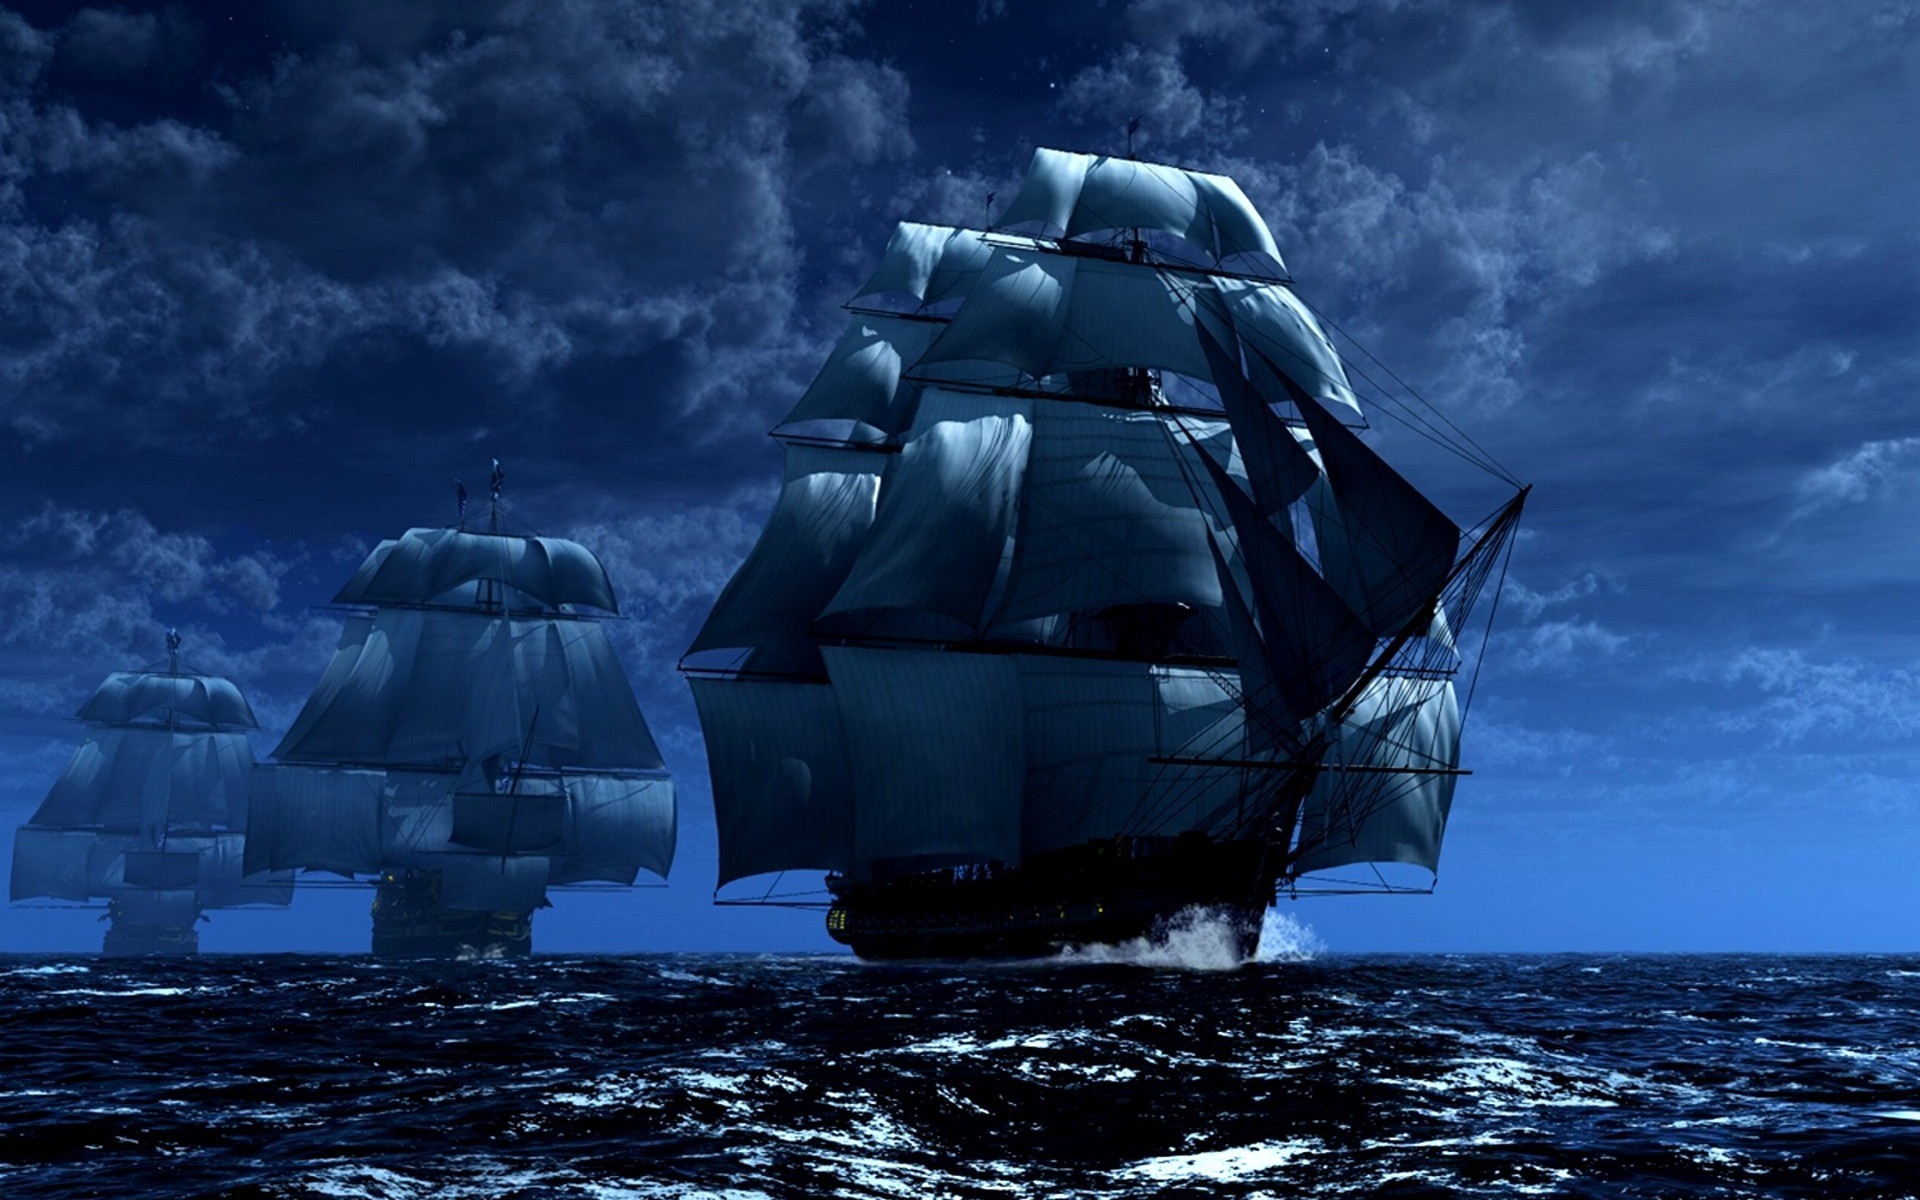 The sailing ships wallpapers and images – wallpapers, pictures, photos